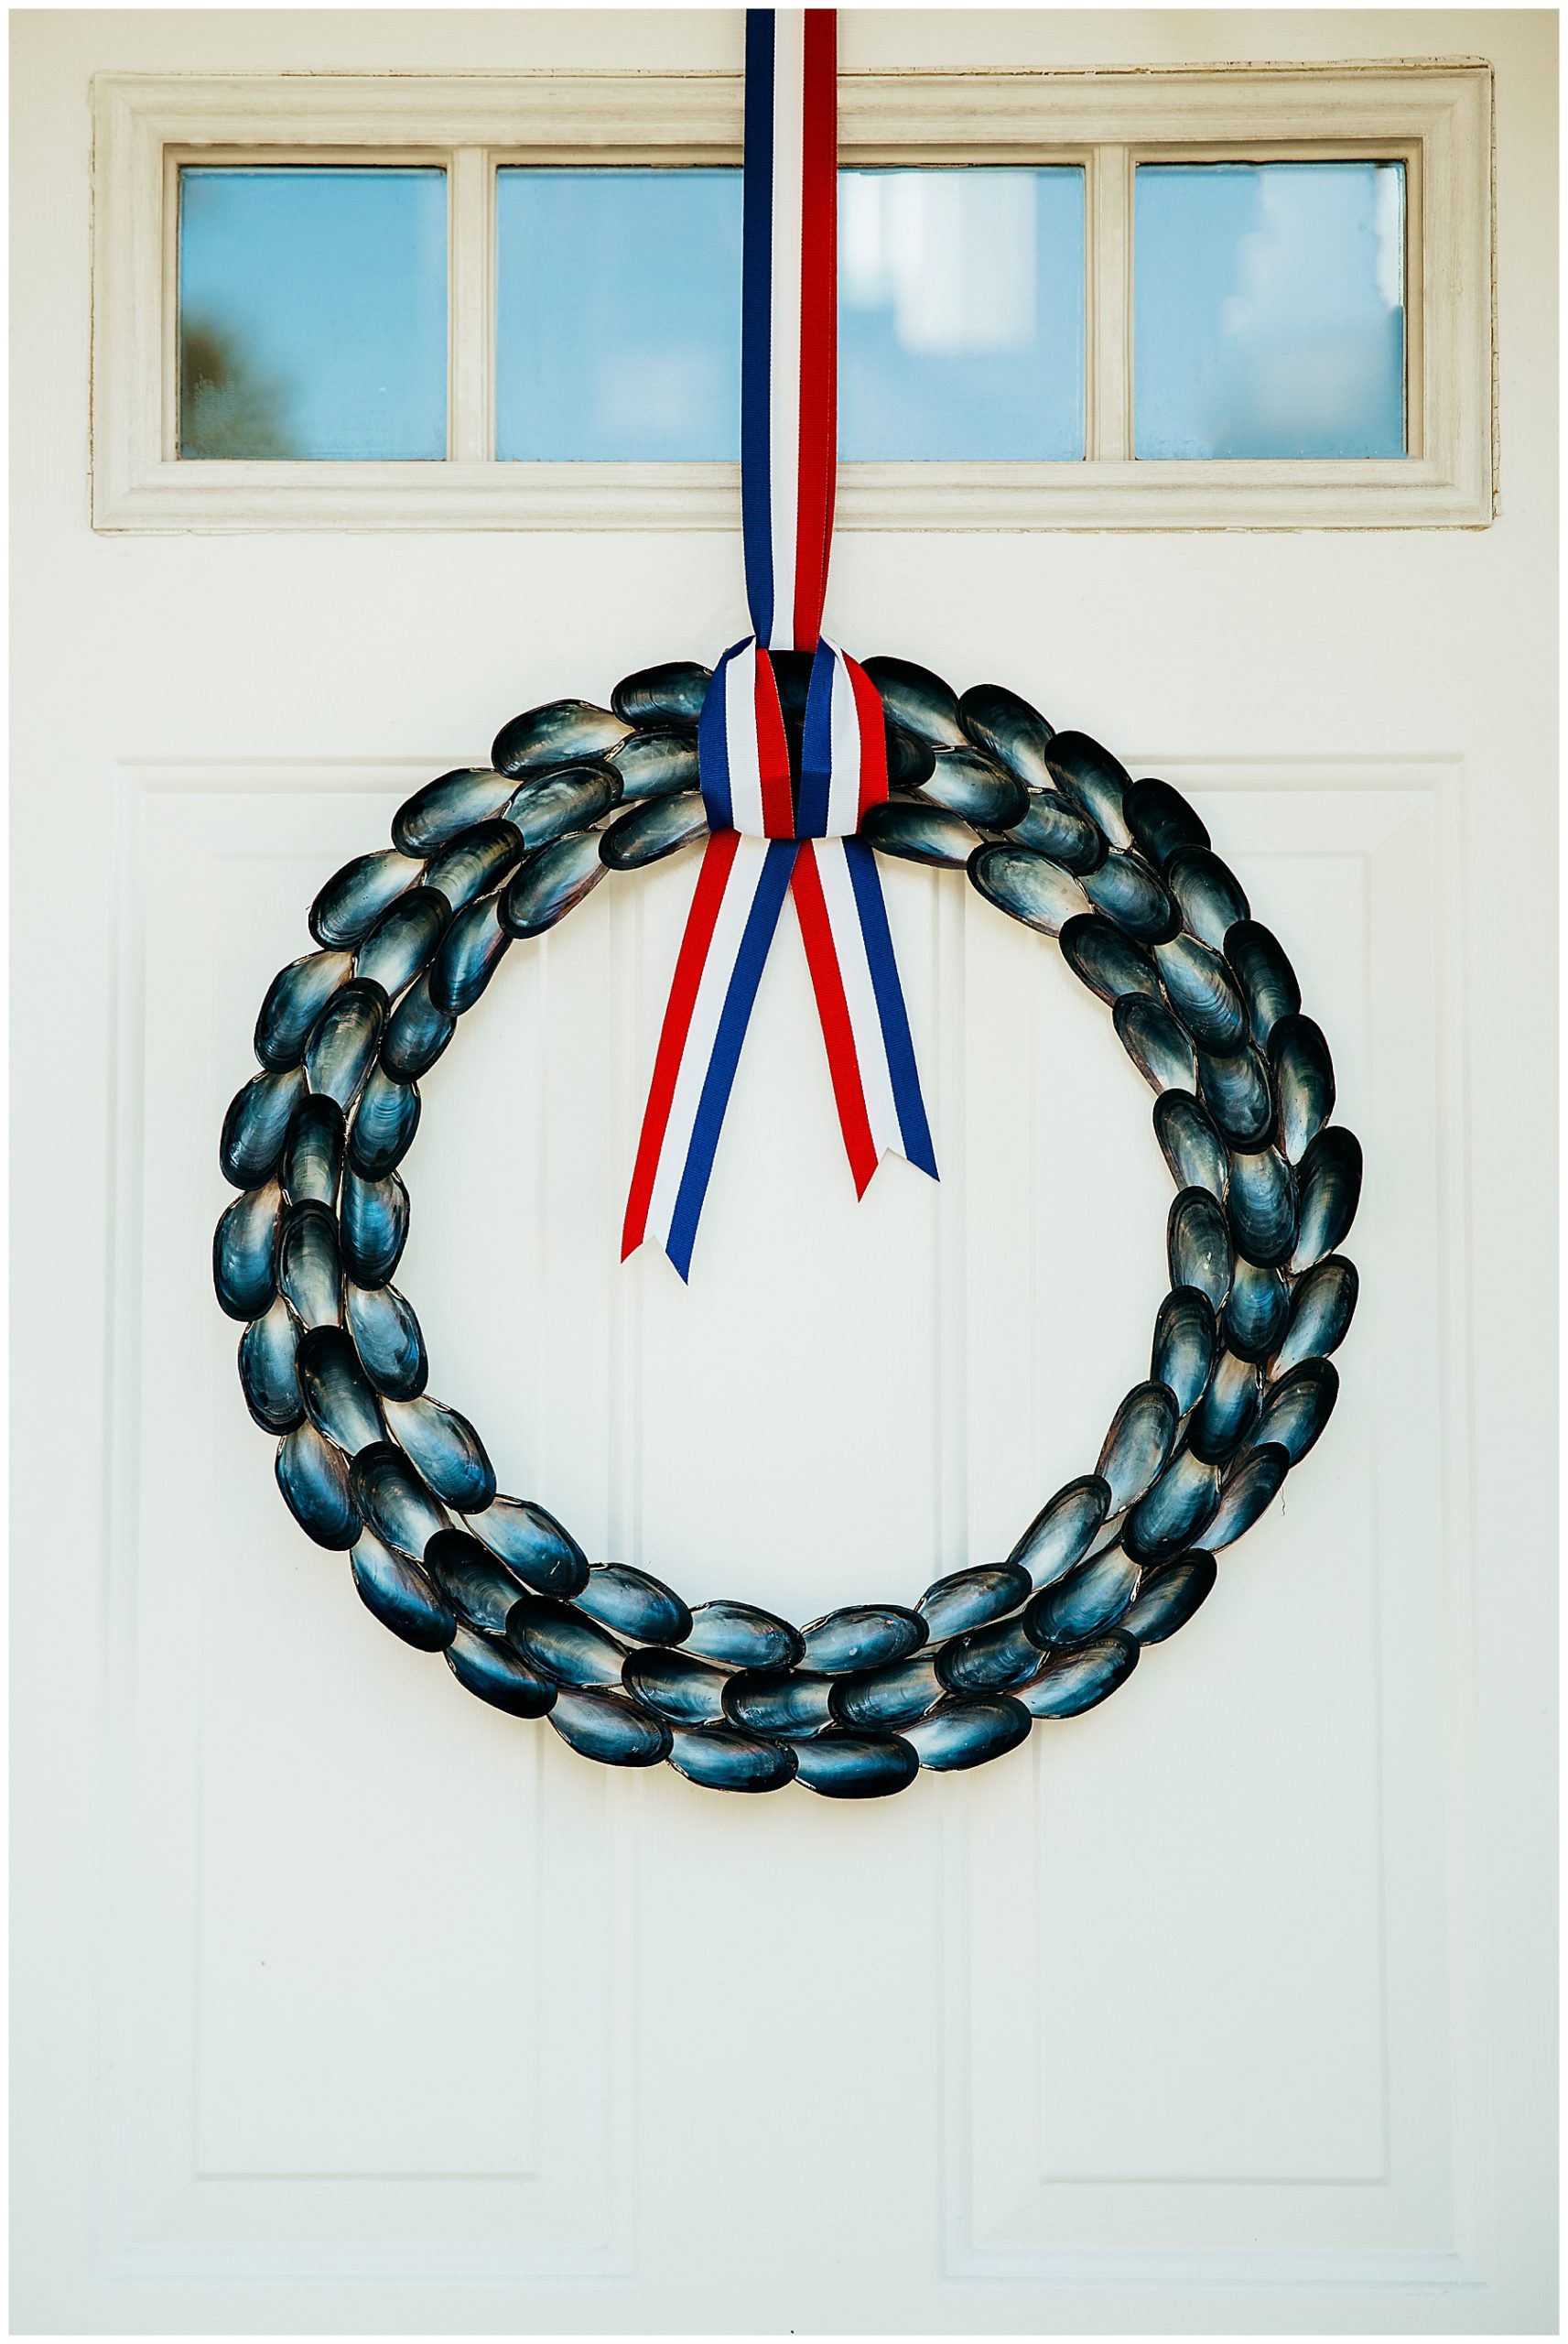 Mussel shell wreath with red white and blue ribbon hung on front door